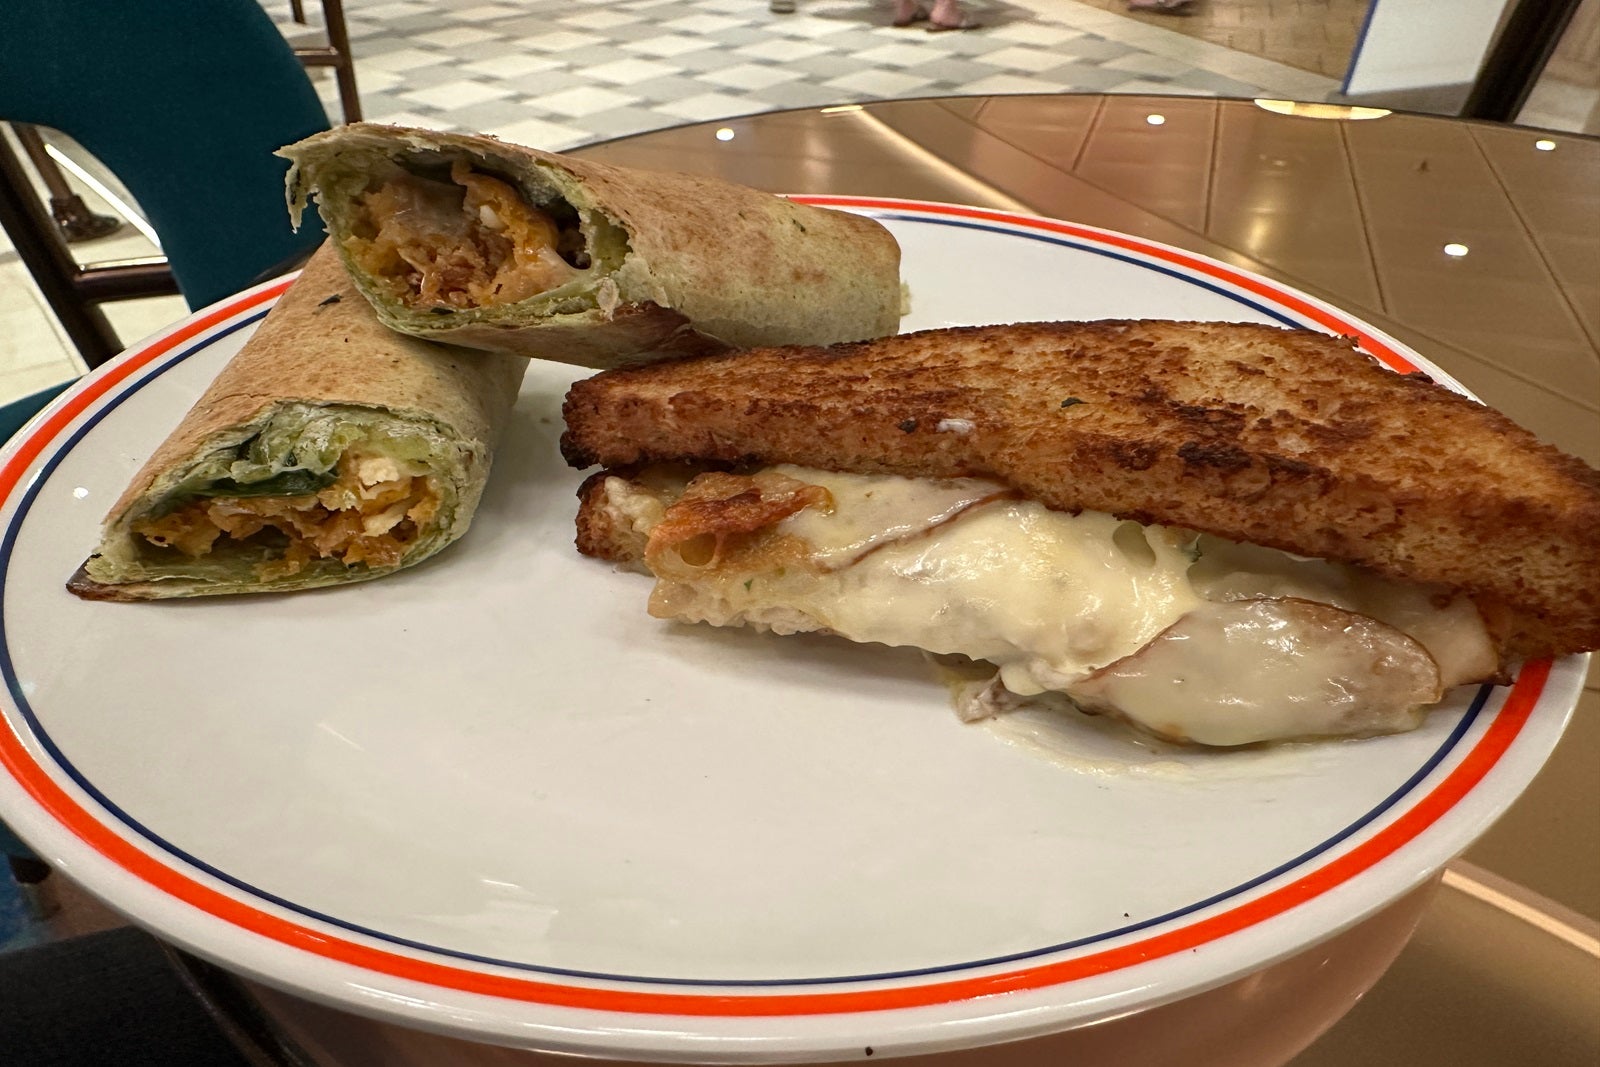 A wrap and a sandwich on a white plate